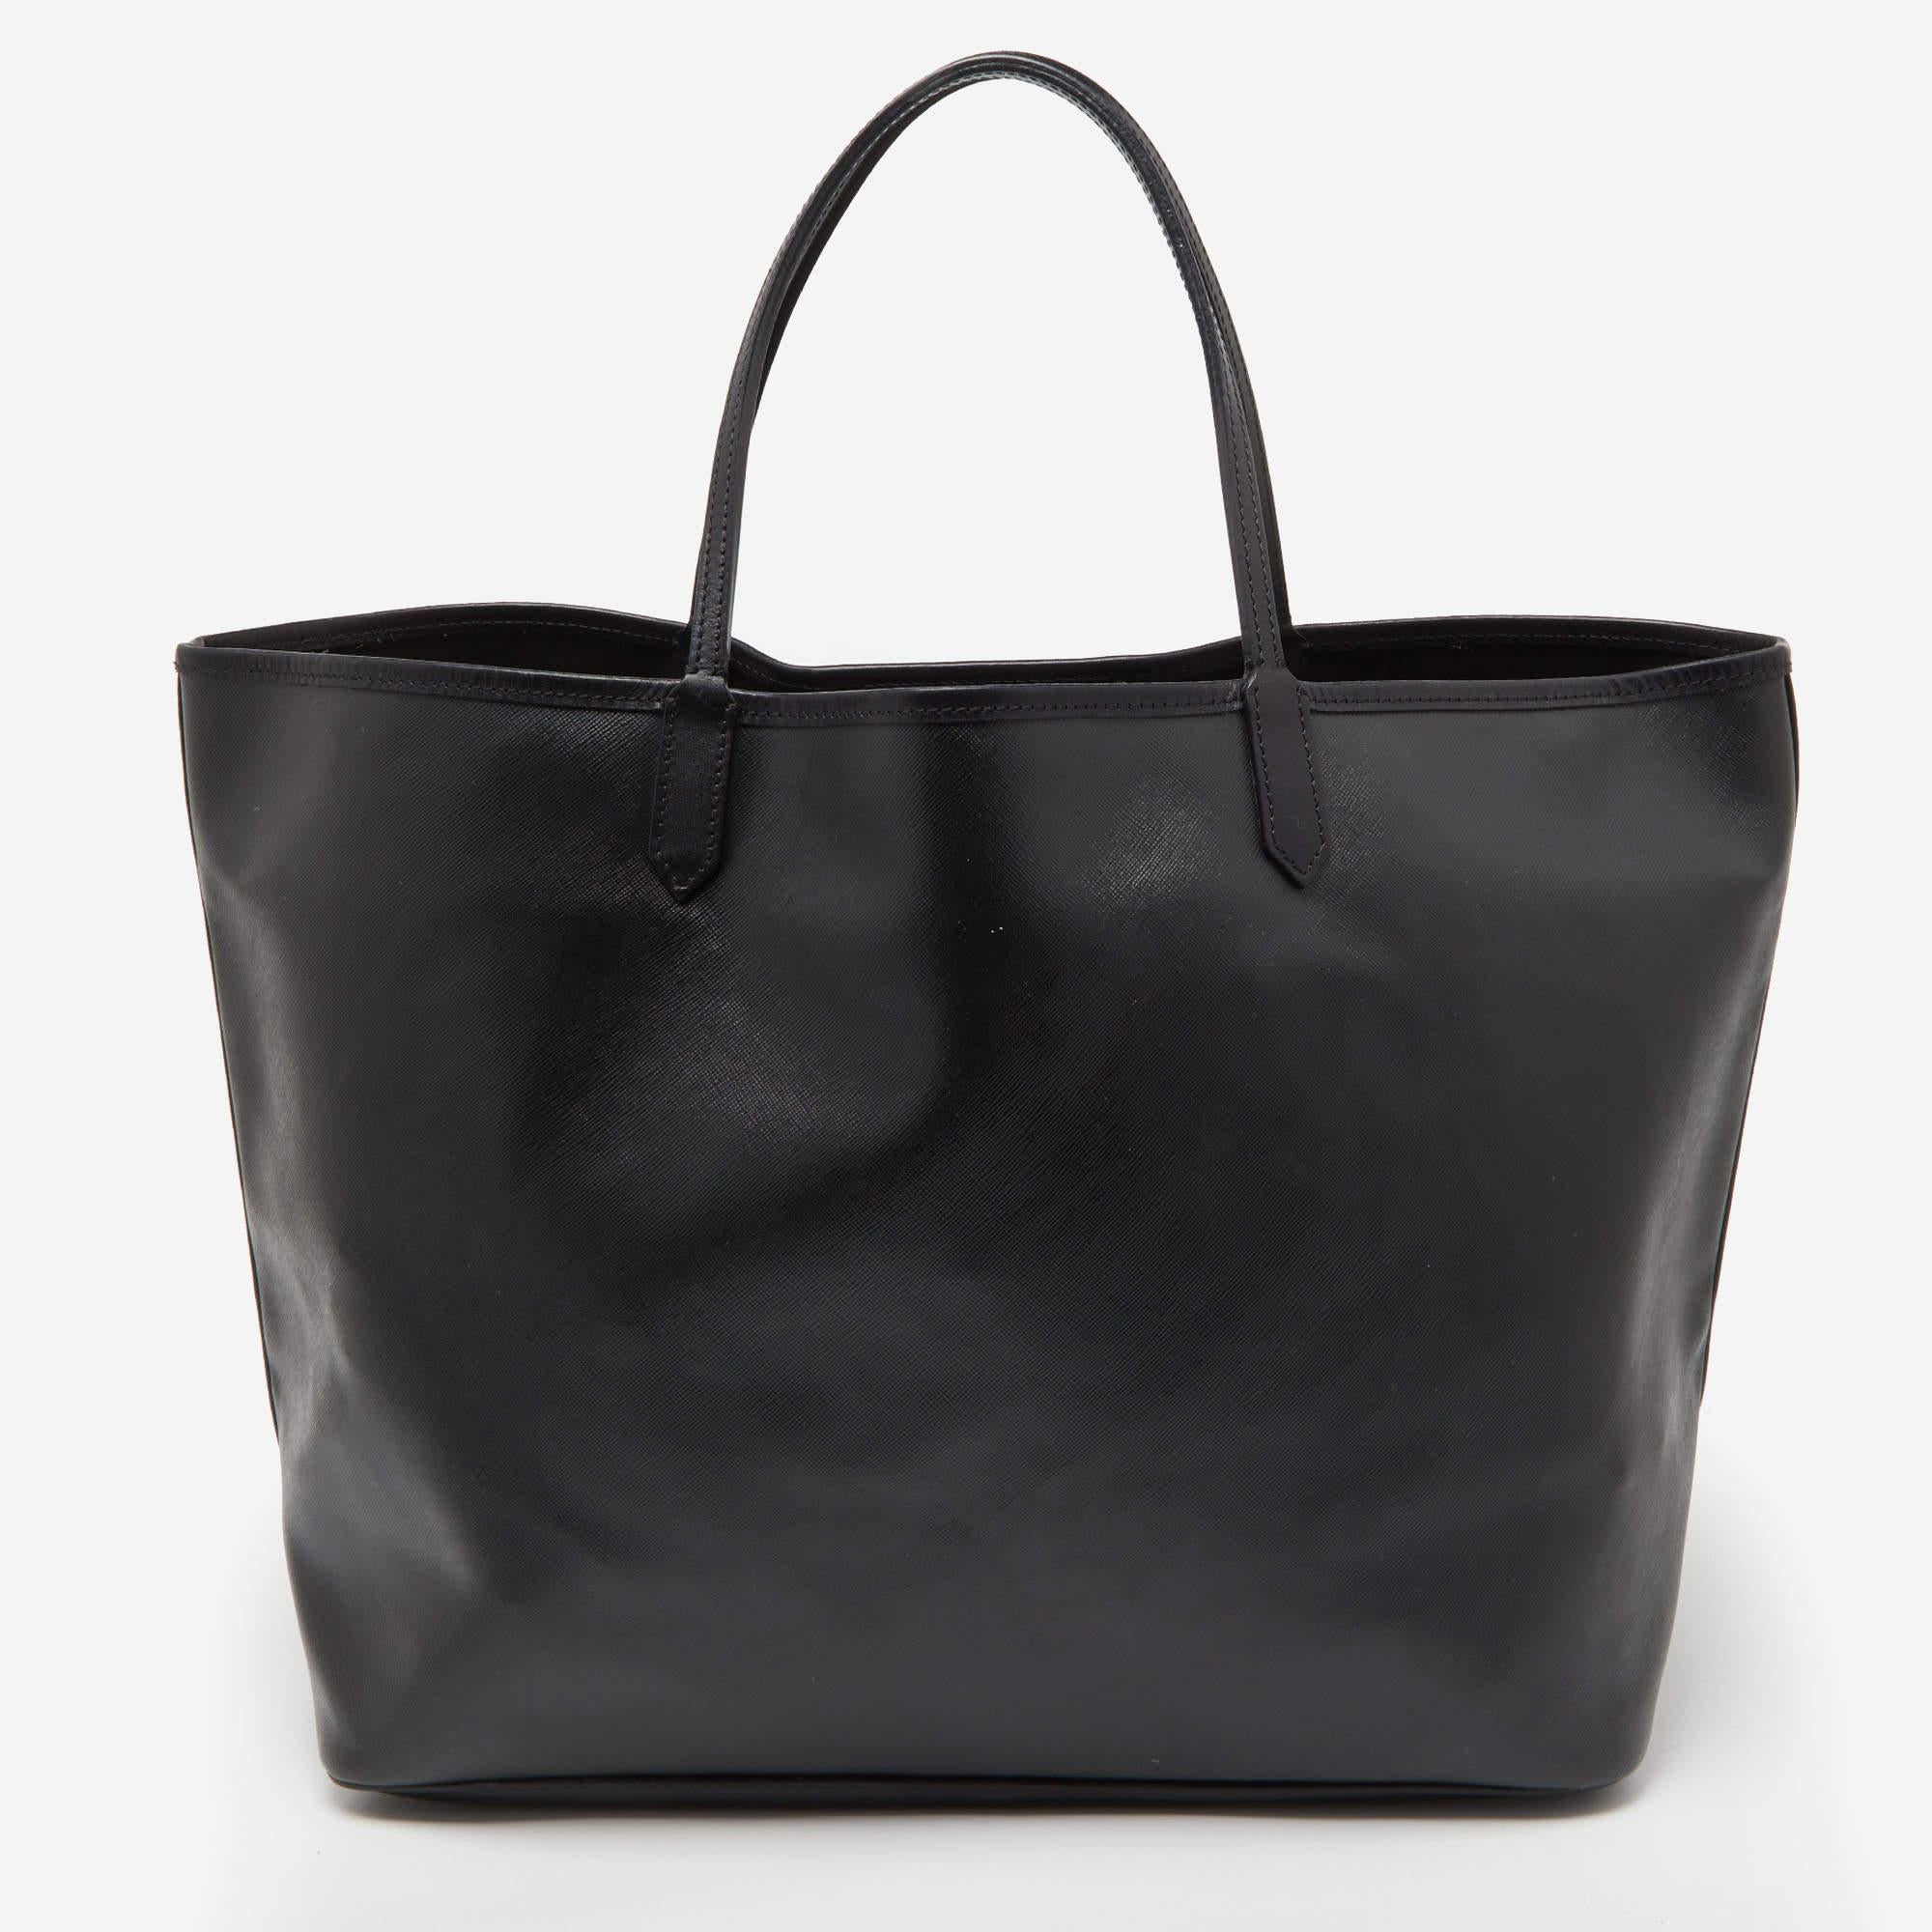 Indulge in timeless luxury with this Givenchy shopper bag. Meticulously handcrafted, this iconic piece combines heritage, elegance, and craftsmanship, elevating your style to a level of unmatched sophistication.

Includes: Original Pouch

